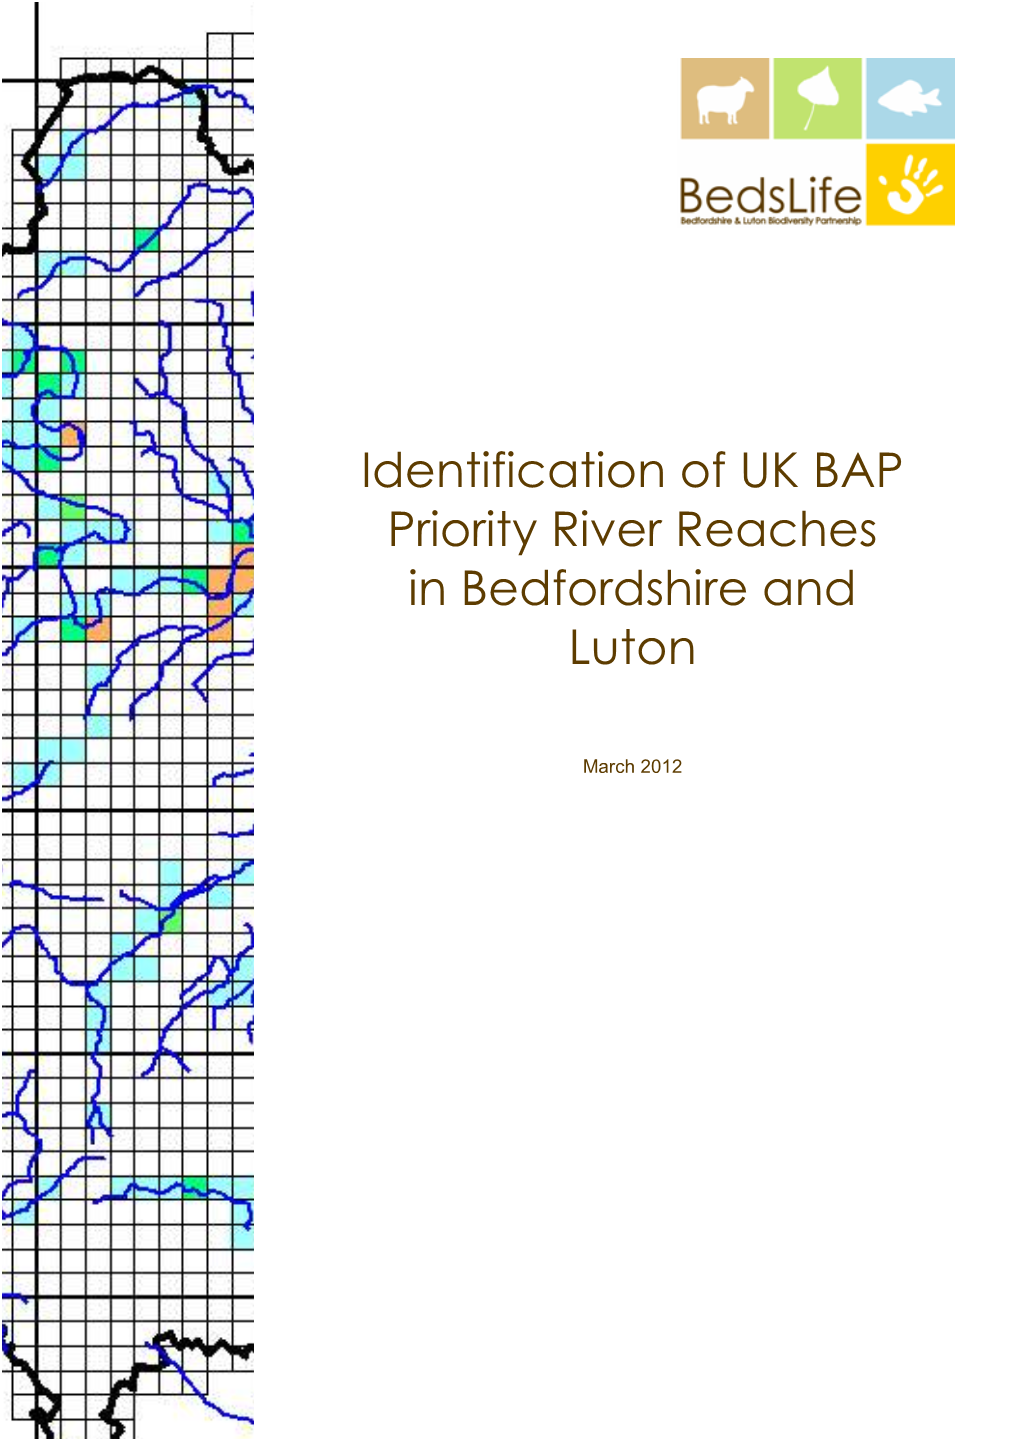 Identification of UK BAP Priority River Reaches in Bedfordshire and Luton